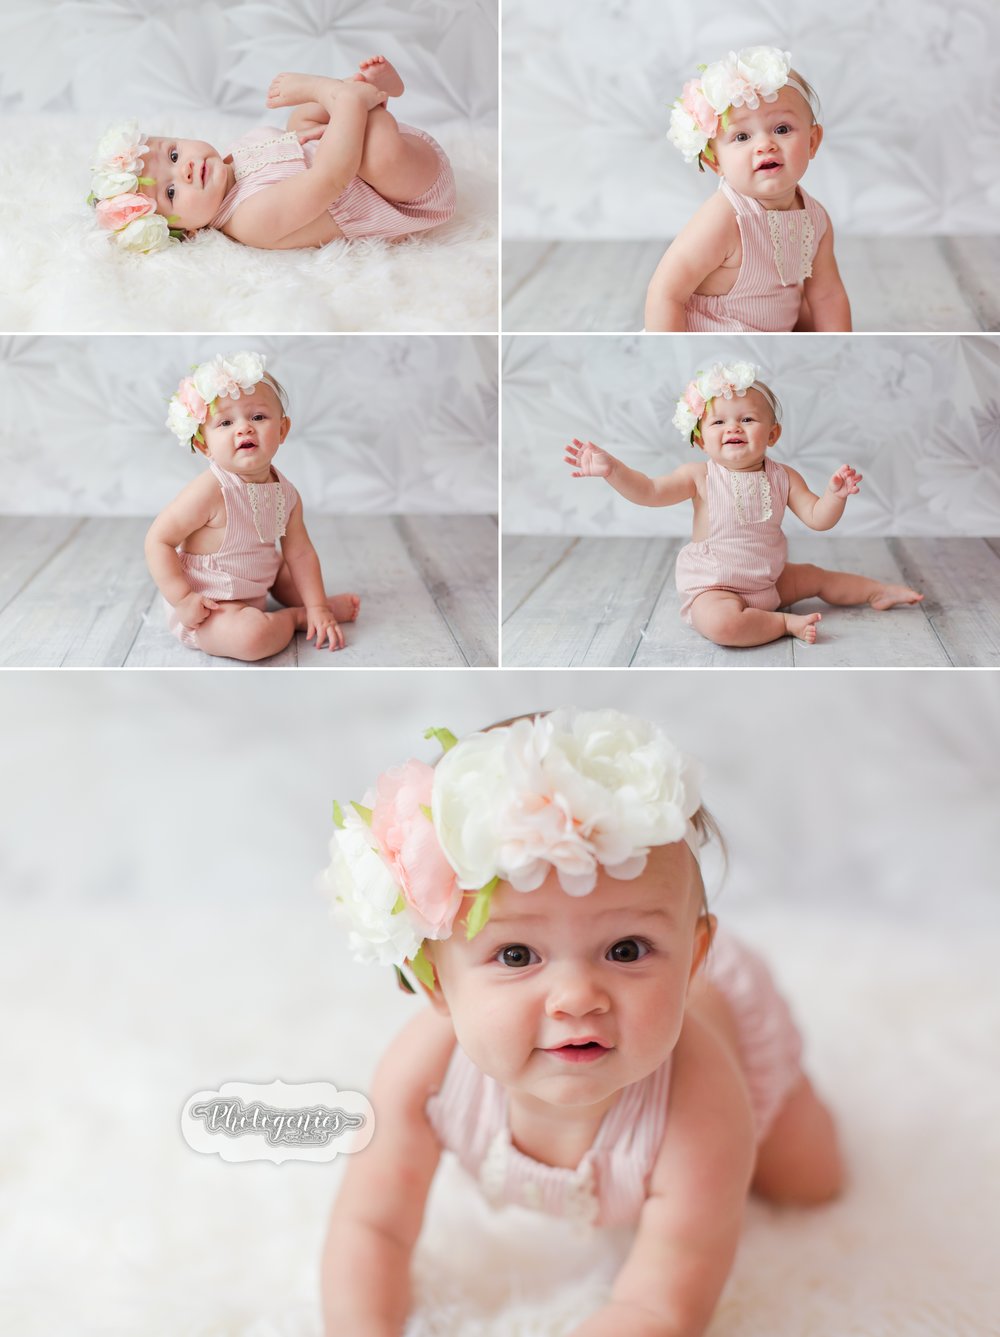  baby_girl_sitting_up_session_6_months_photography_props_cute_ideas_pearls_tutu_flowers 3 